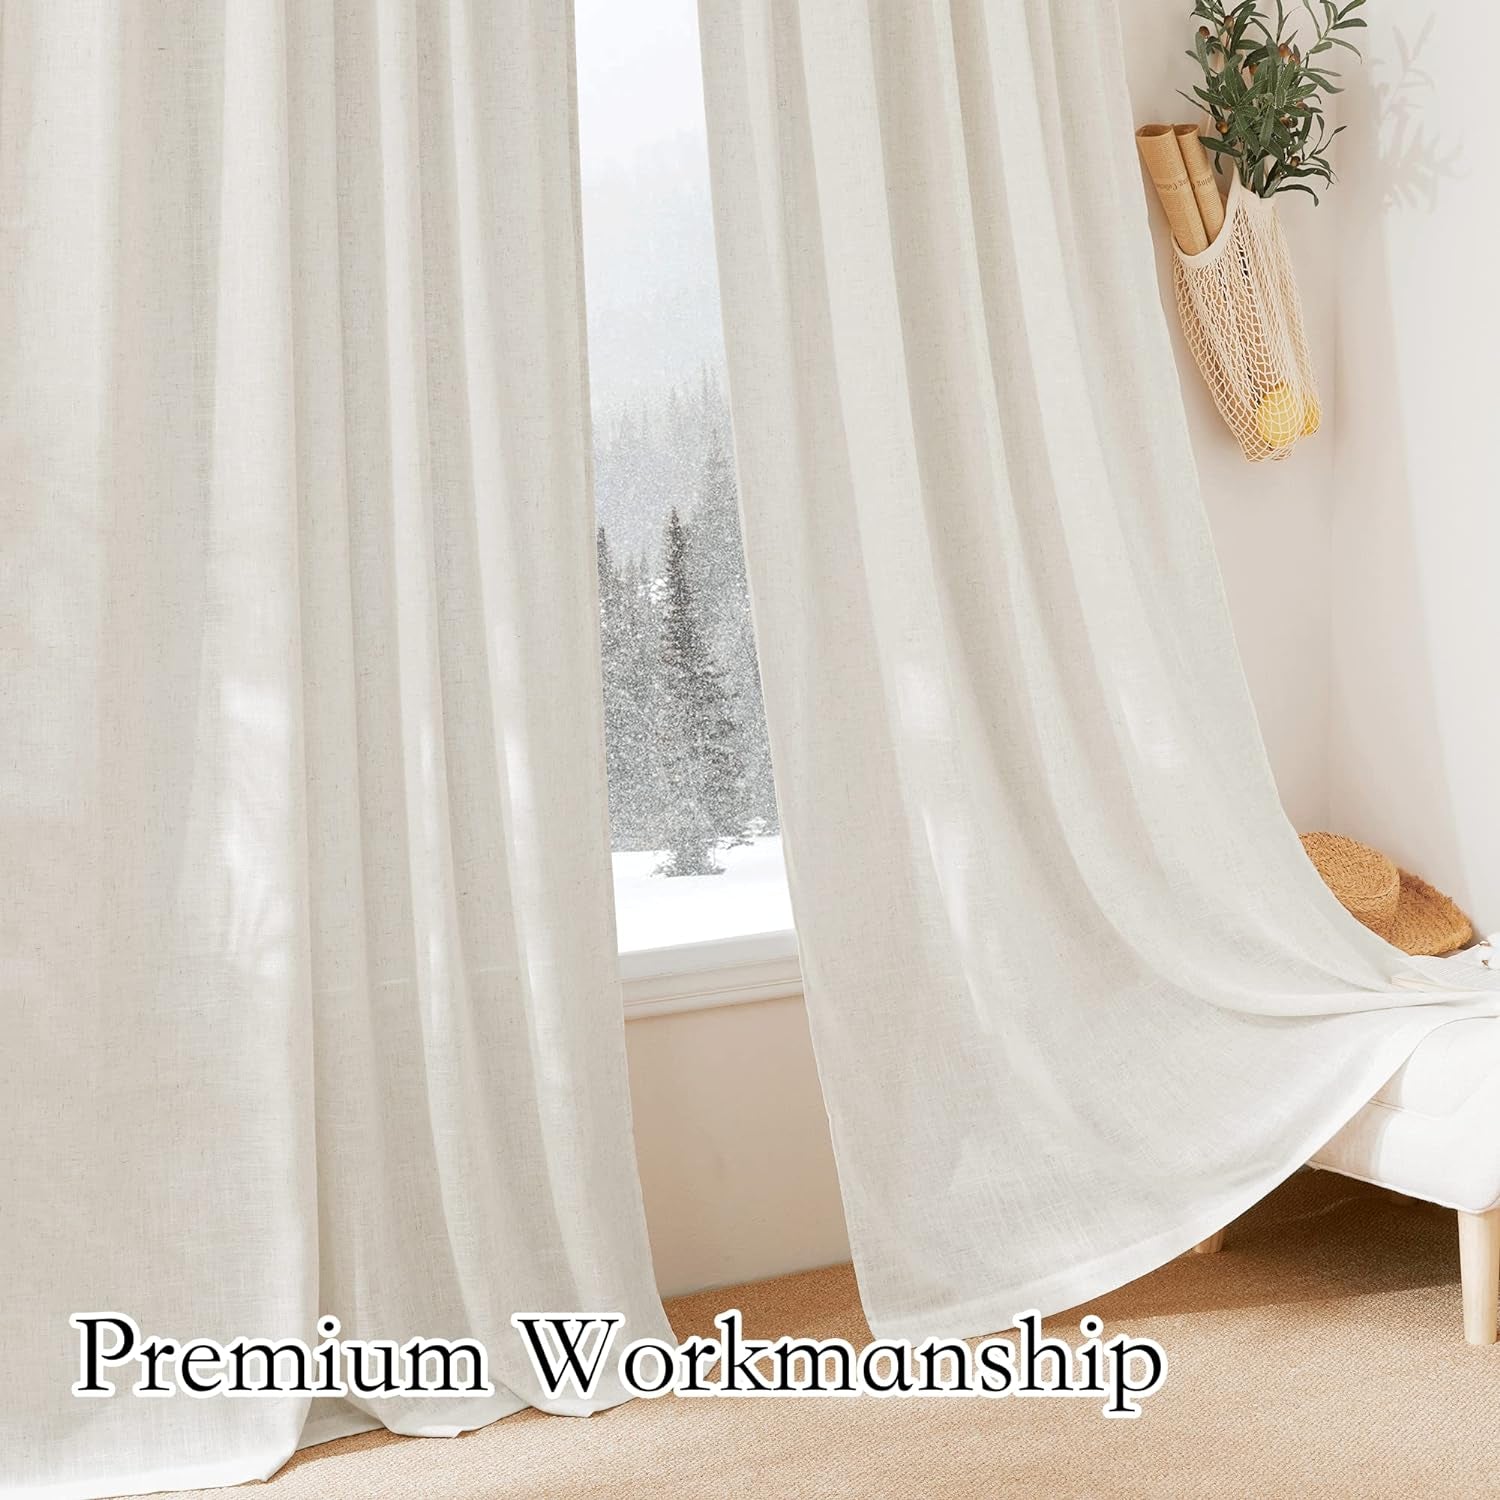 RYB HOME Linen Flax Curtains 84 Inches Long, Absorbent Linen Woven Half Privacy Light Filtering Drapes Semi Sheer Curtains for Living Room Bedroom Home Office Patio, 52 W X 84 L, Linen, 2 Panels  RYB HOME   